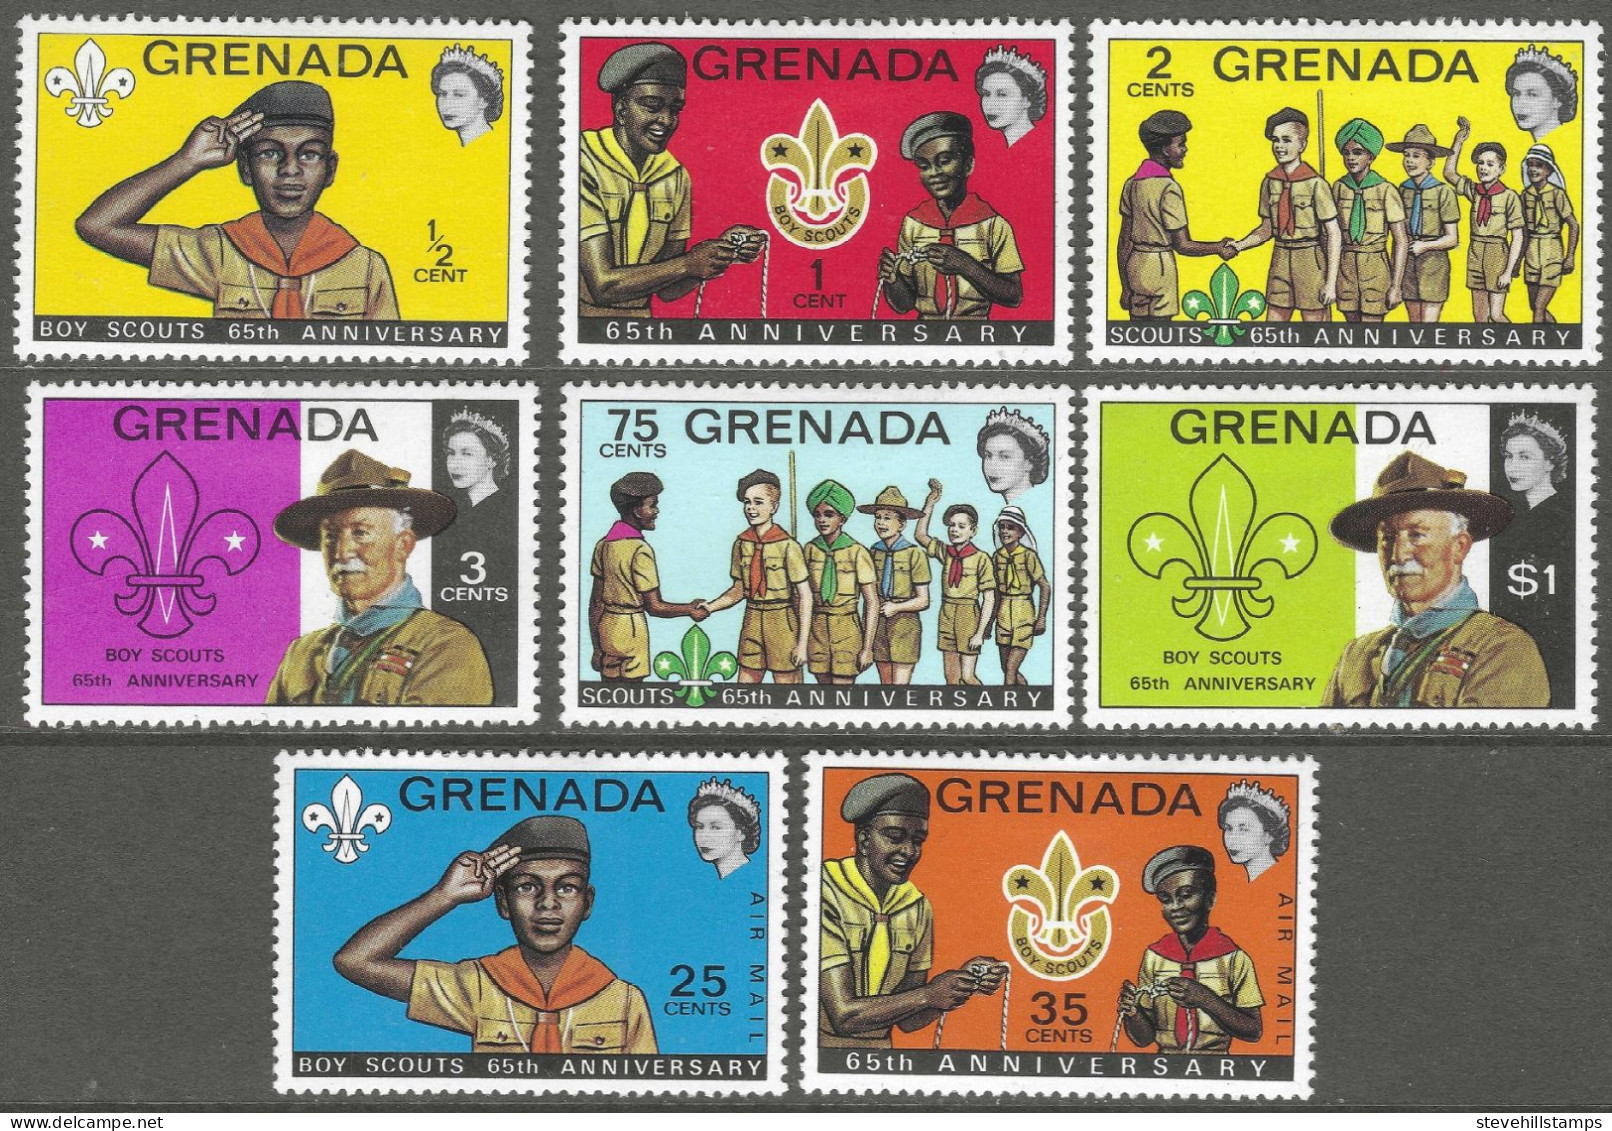 Grenada. 1972 65th Anniversary Of The Boy Scouts. MH Complete Set Excl M/S. SG 532-539 - Grenade (...-1974)